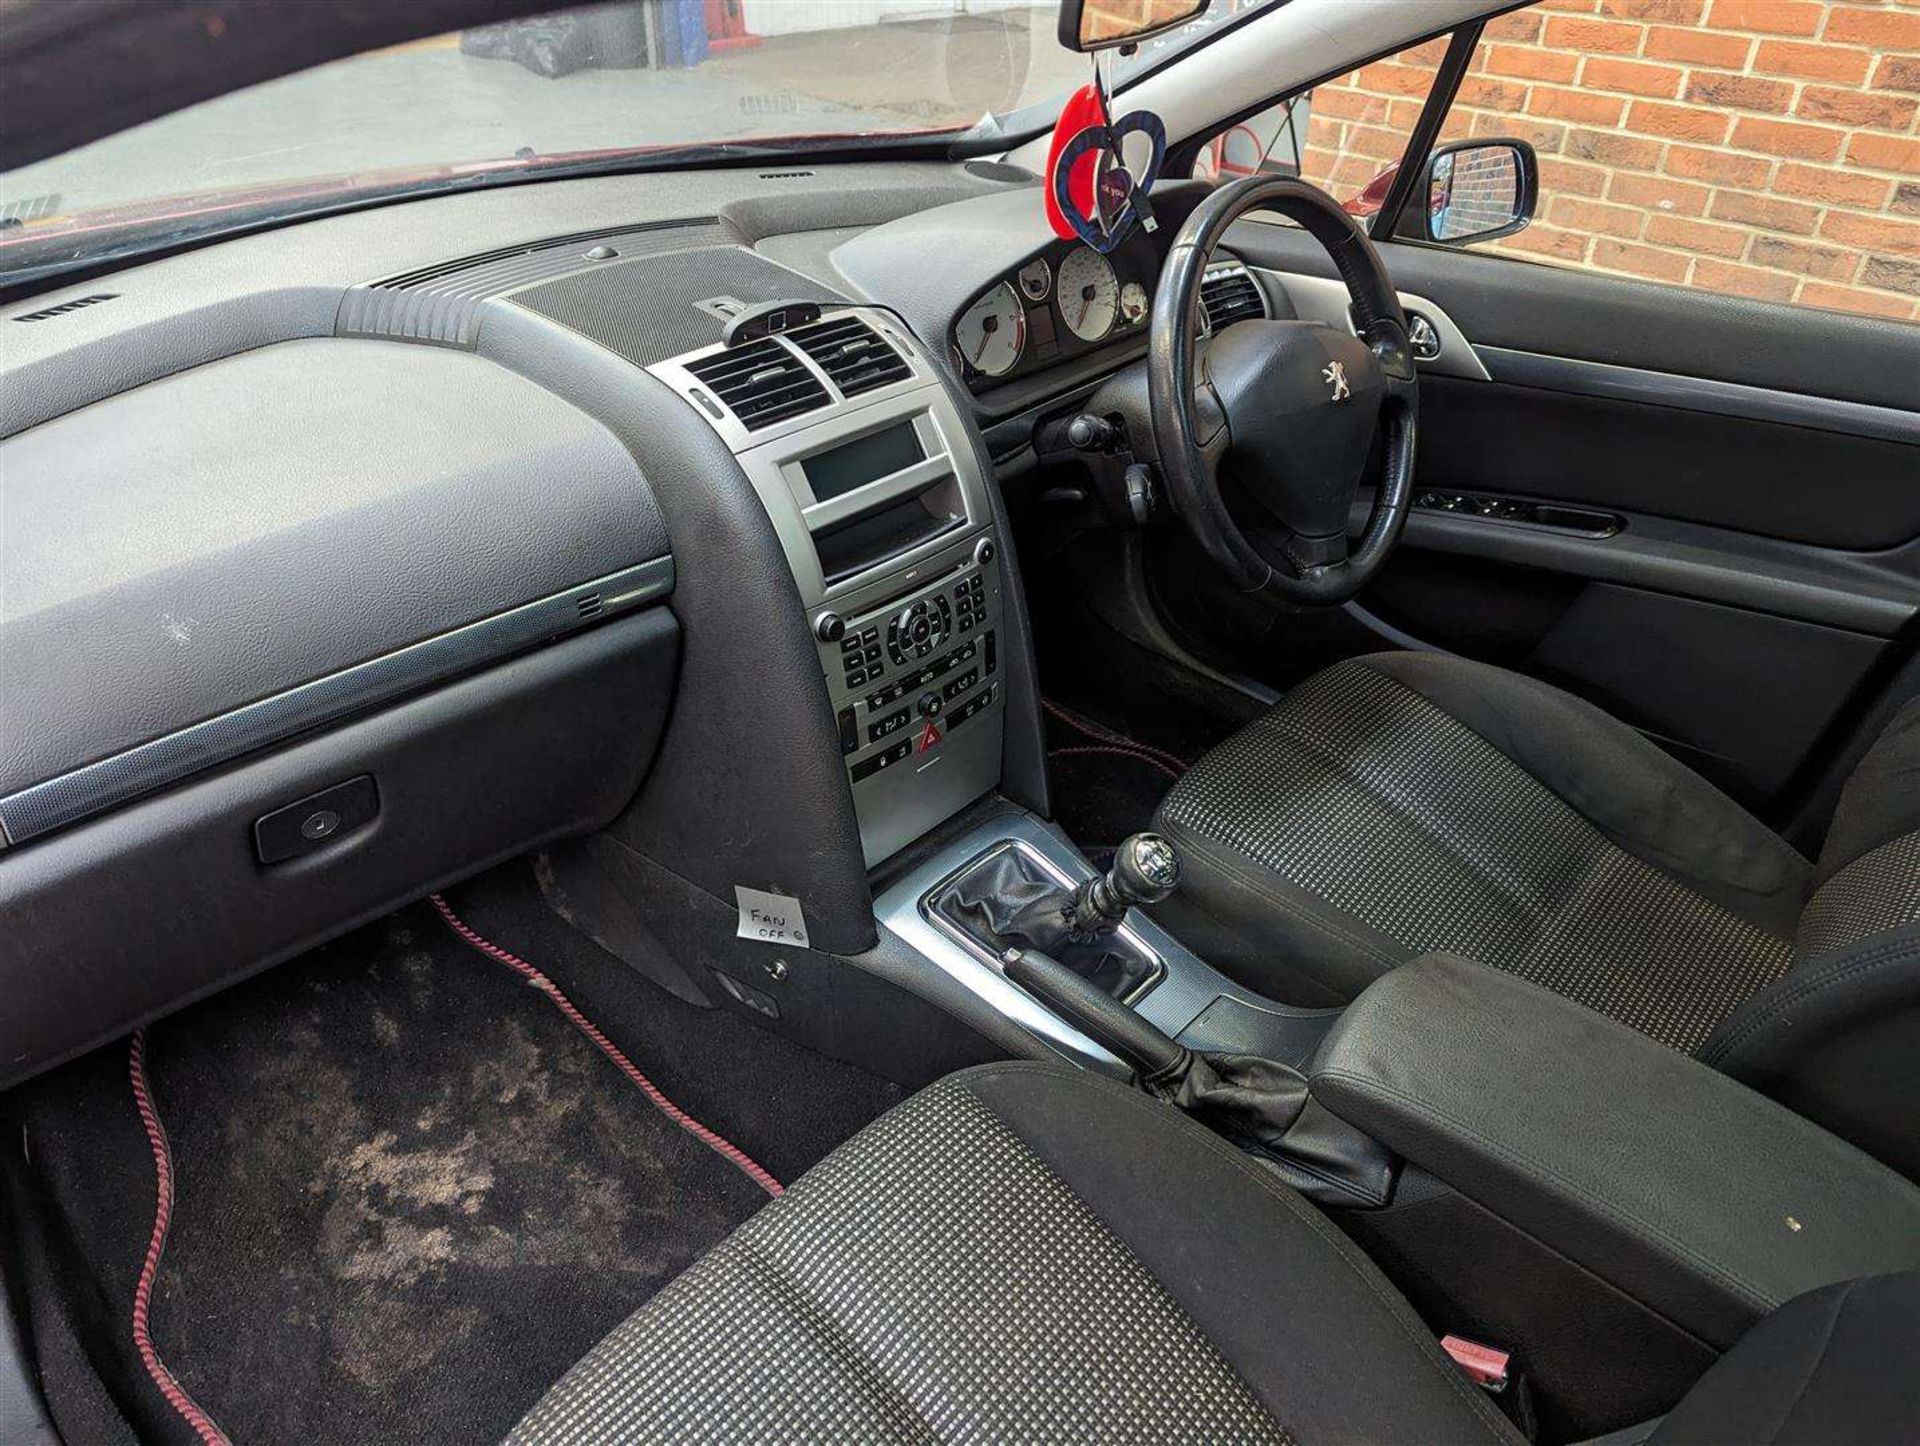 2007 PEUGEOT 407 SW SE HDI - Image 16 of 30